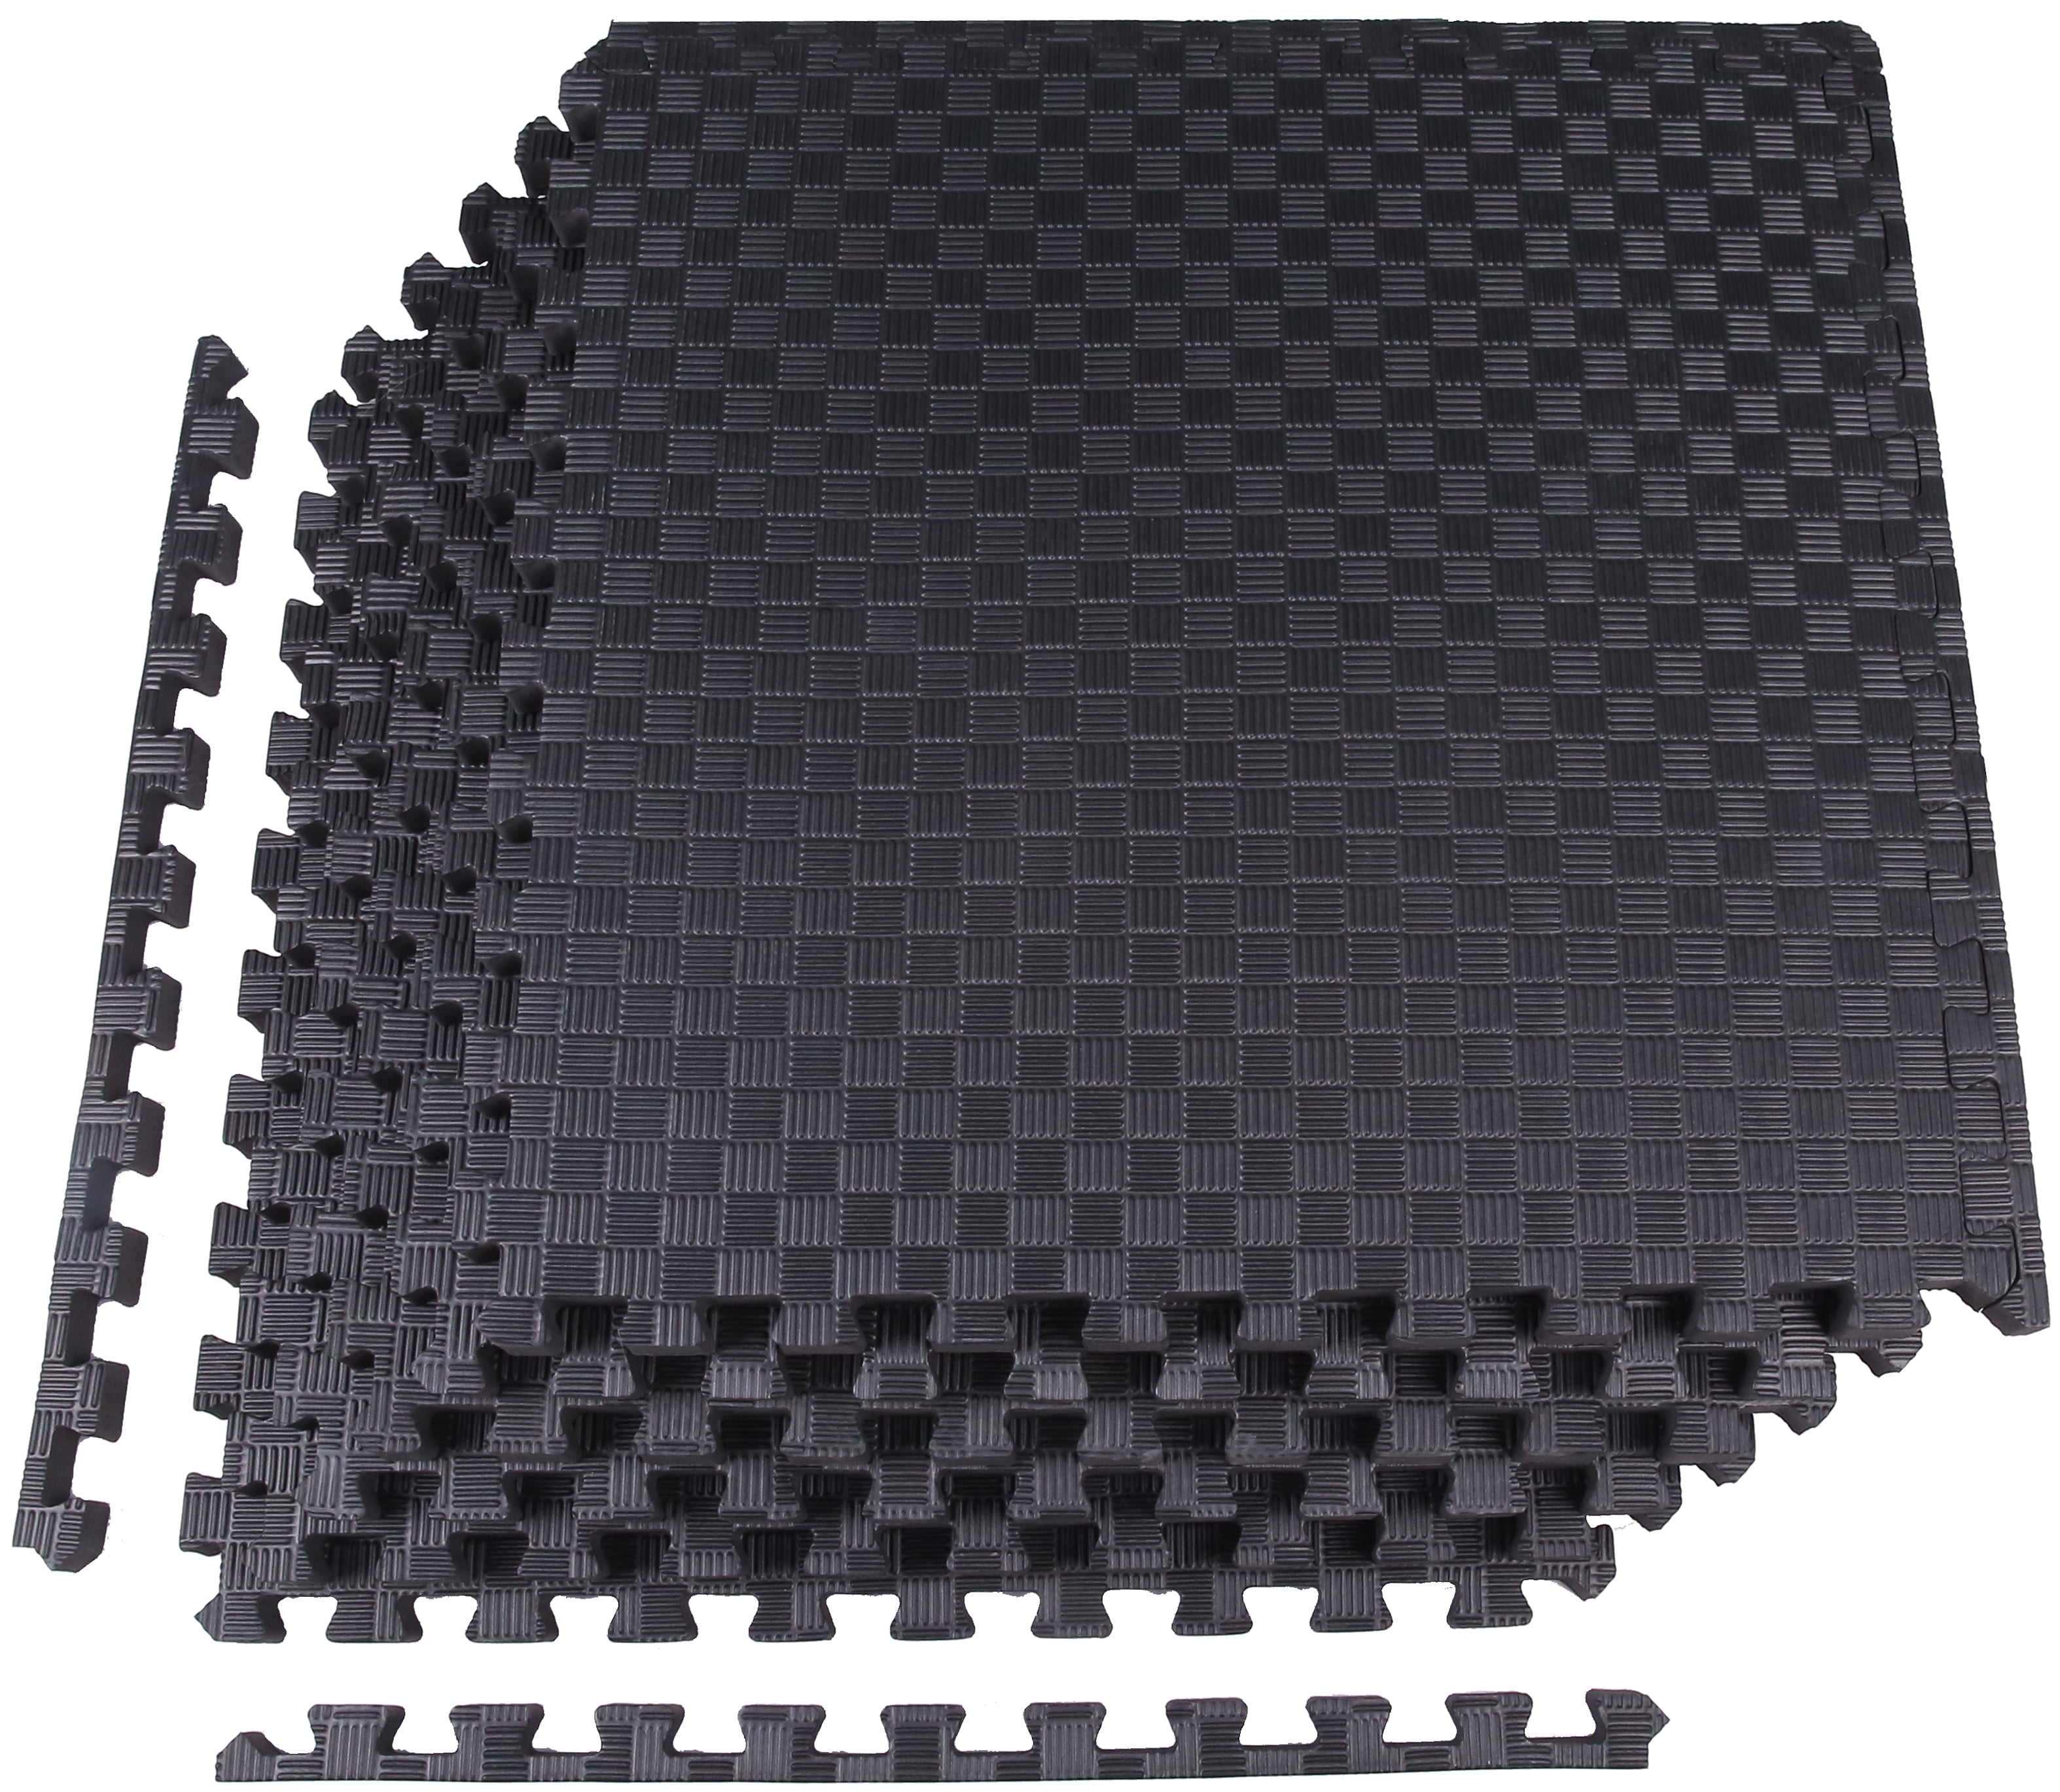 Puzzle Exercise Mat Tiles Non-Toxic with EVA Foam Floor Tiles Crawling Mat Protective Flooring for Gym Equipment